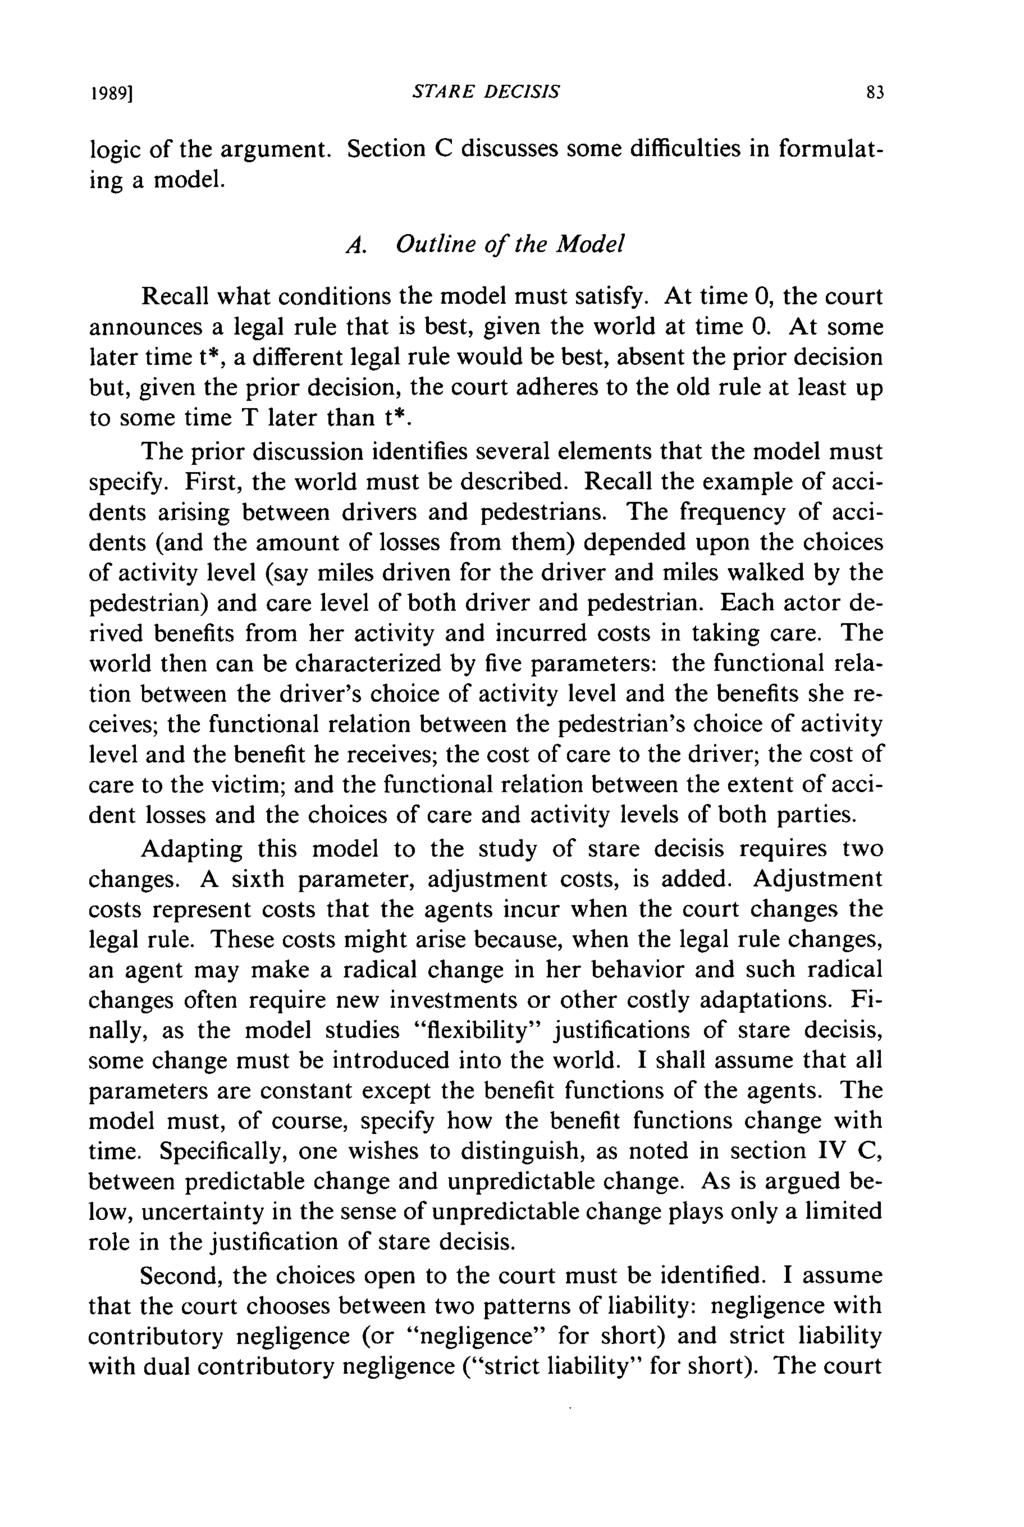 19891 STARE DECISIS logic of the argument. Section C discusses some difficulties in formulating a model. A. Outline of the Model Recall what conditions the model must satisfy.